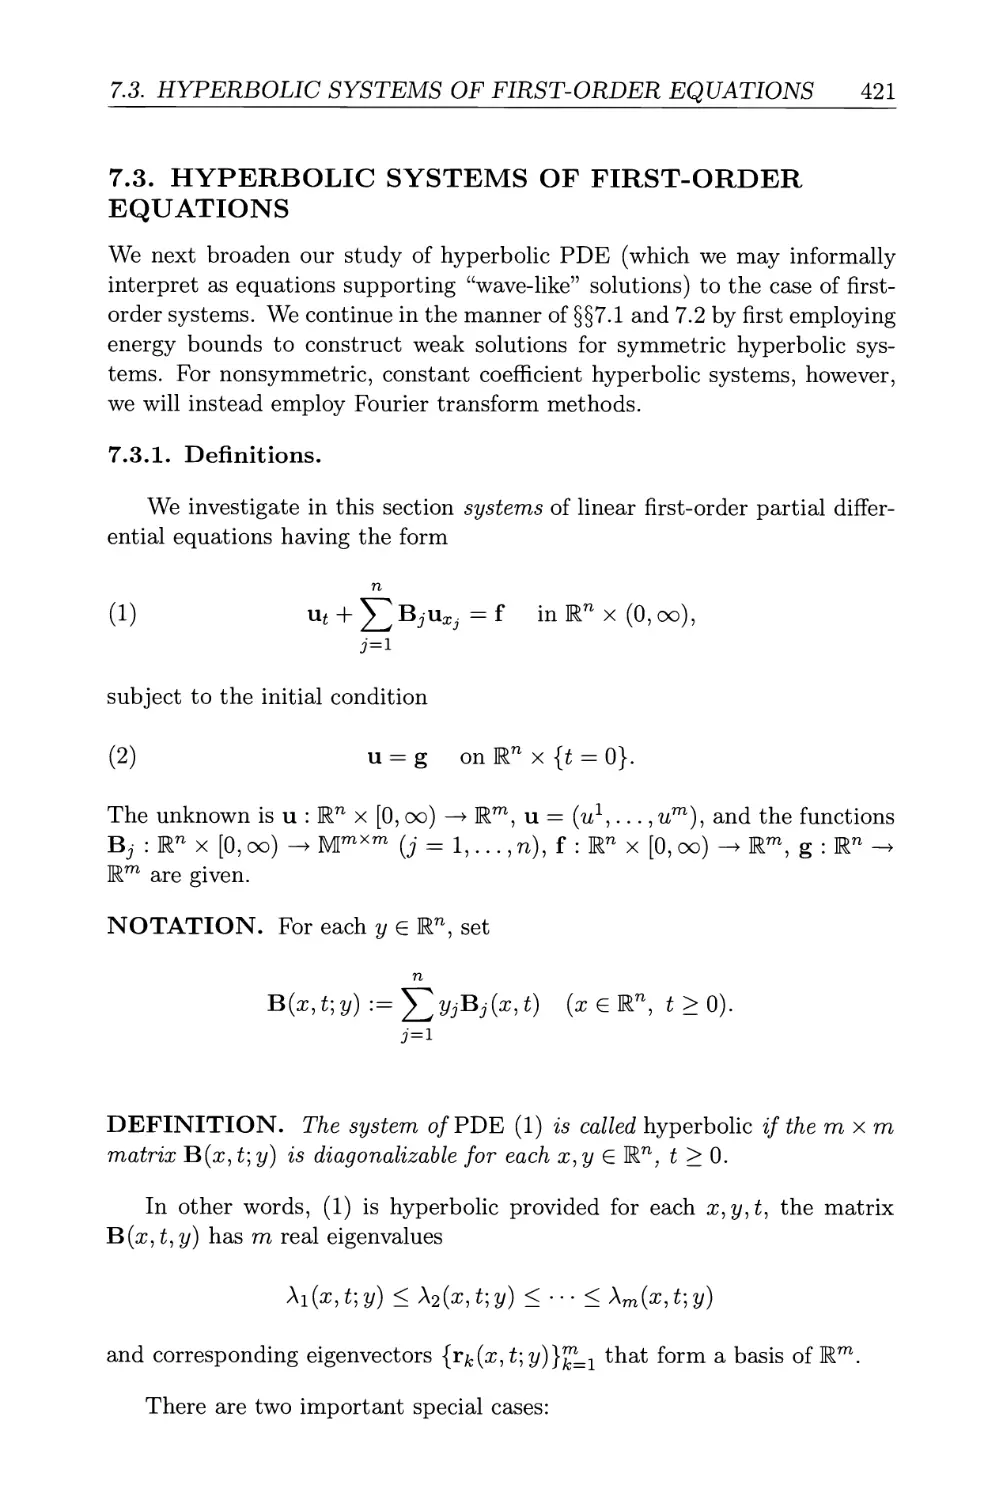 7.3. Hyperbolic systems of first-order equations